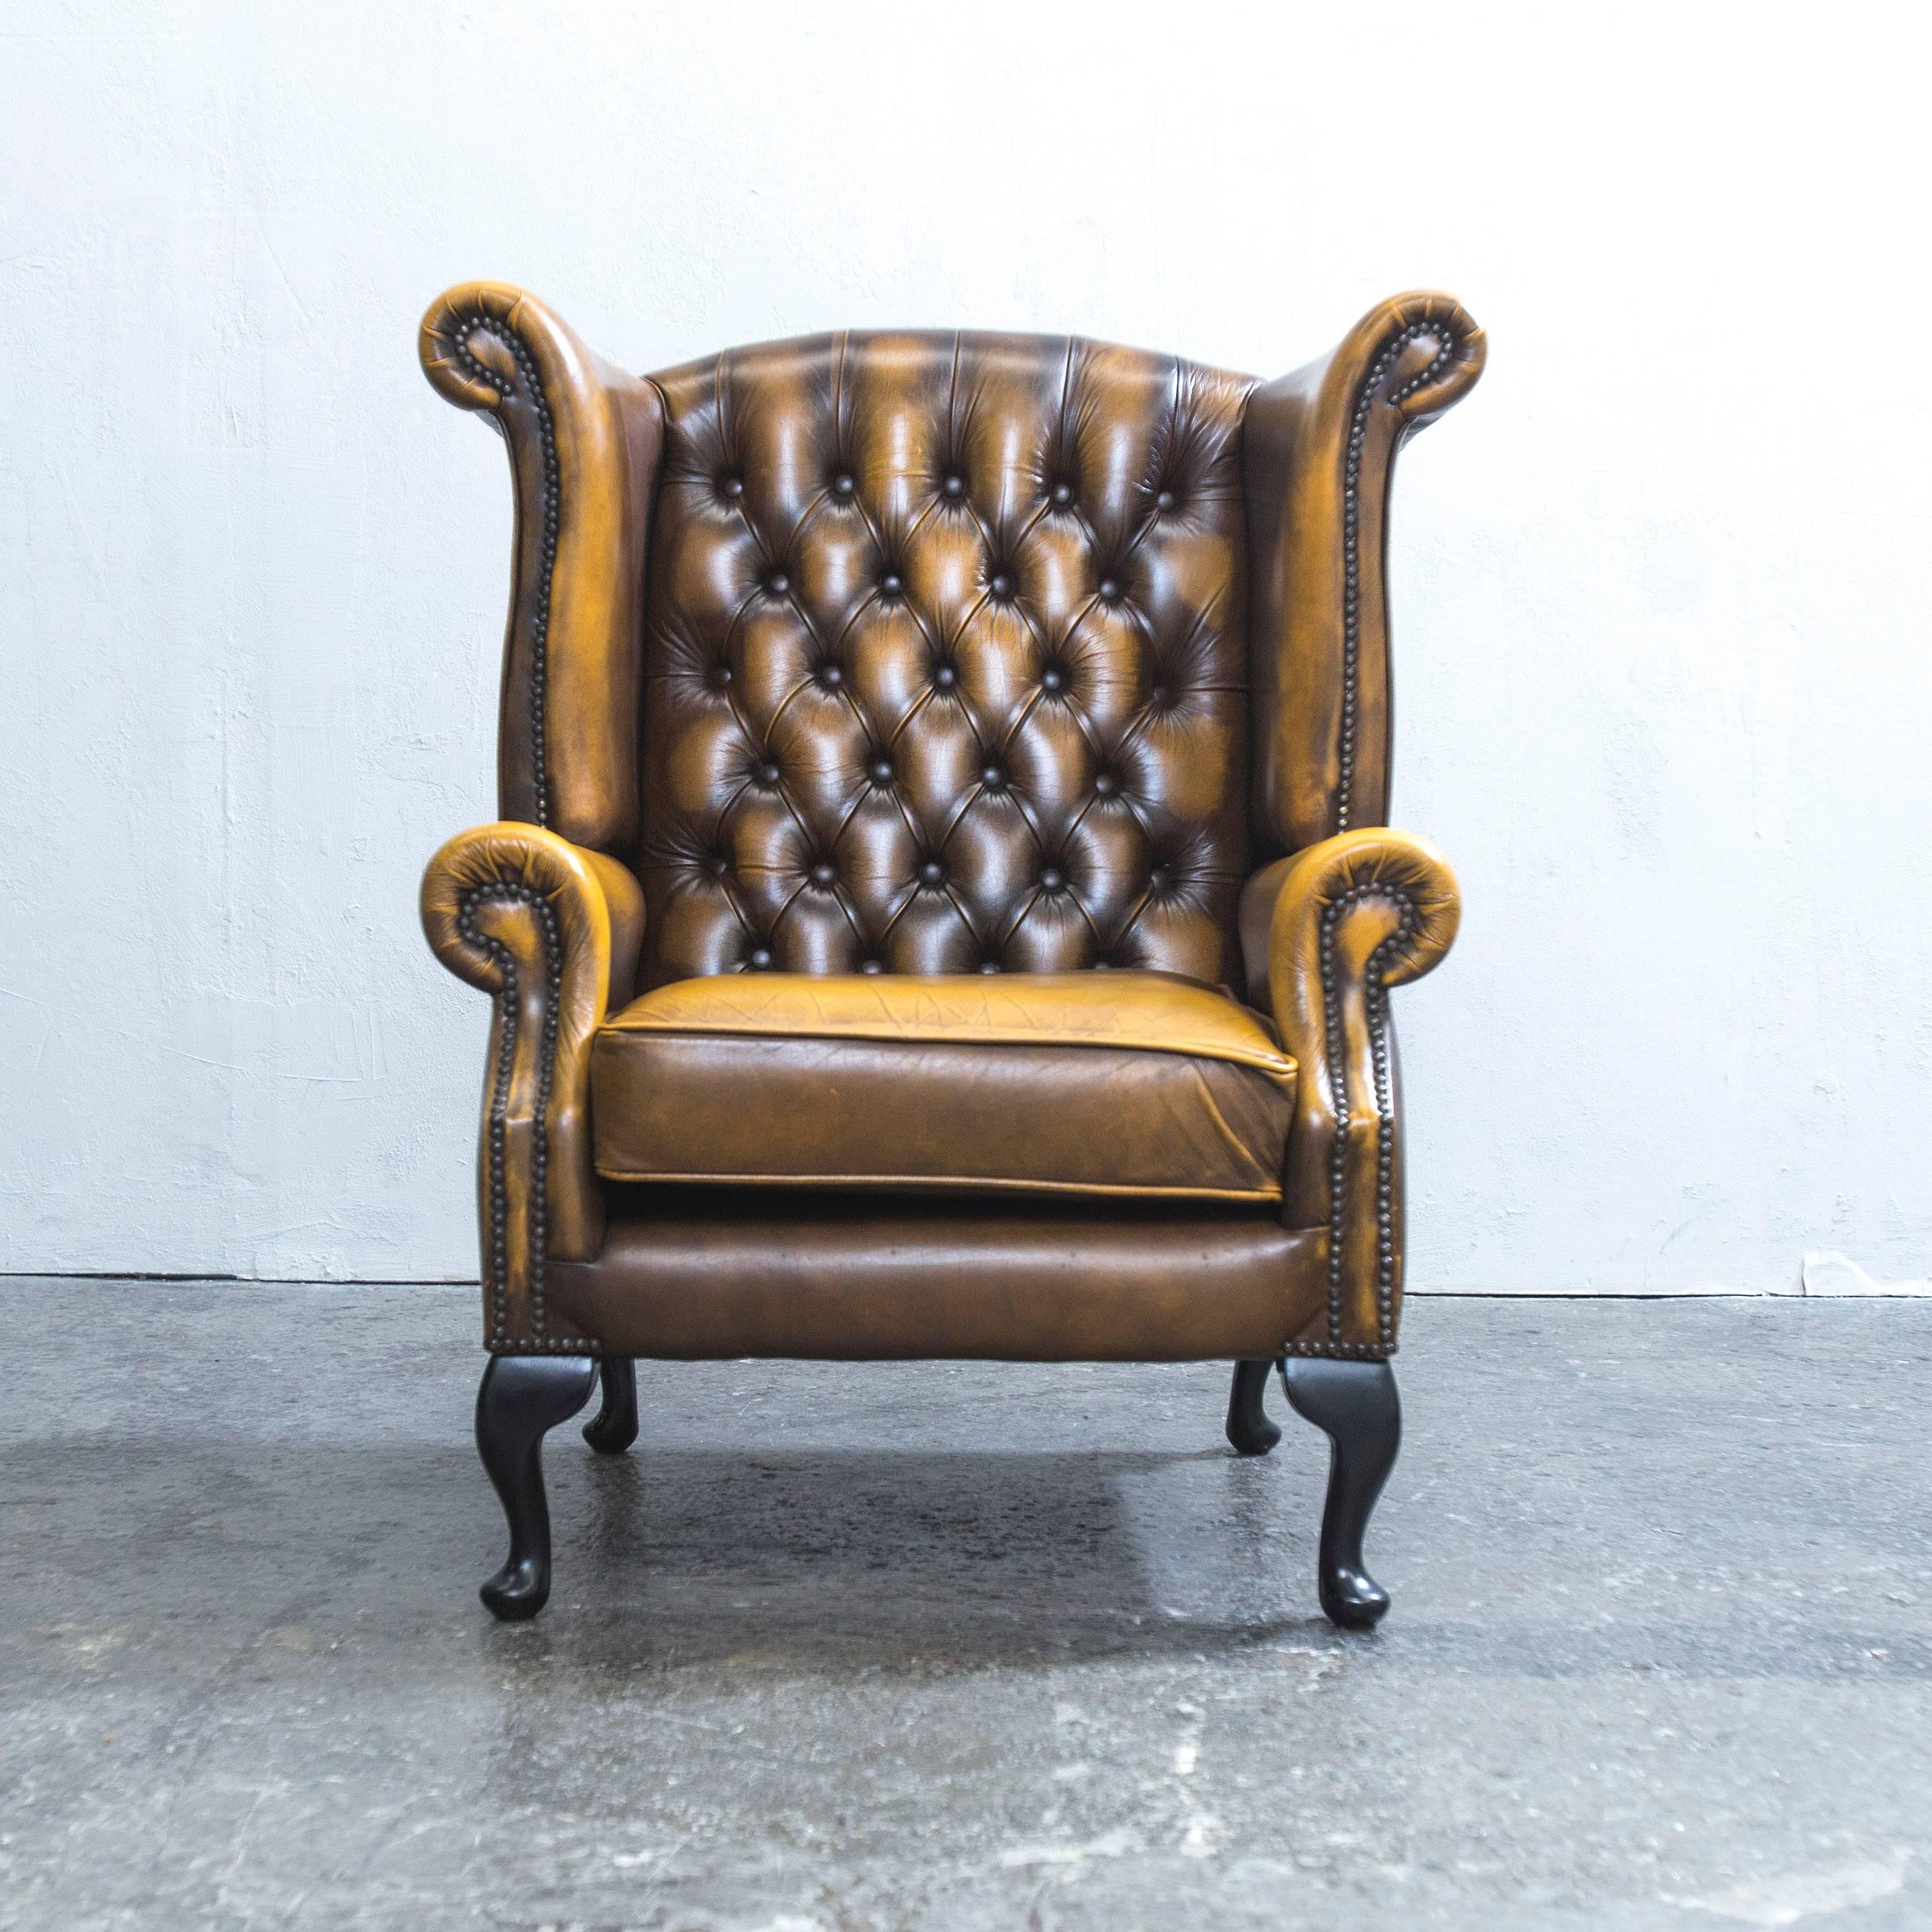 Ocher brown colored Chesterfield leather wingchair in a vintage design, made for pure comfort and elegance.